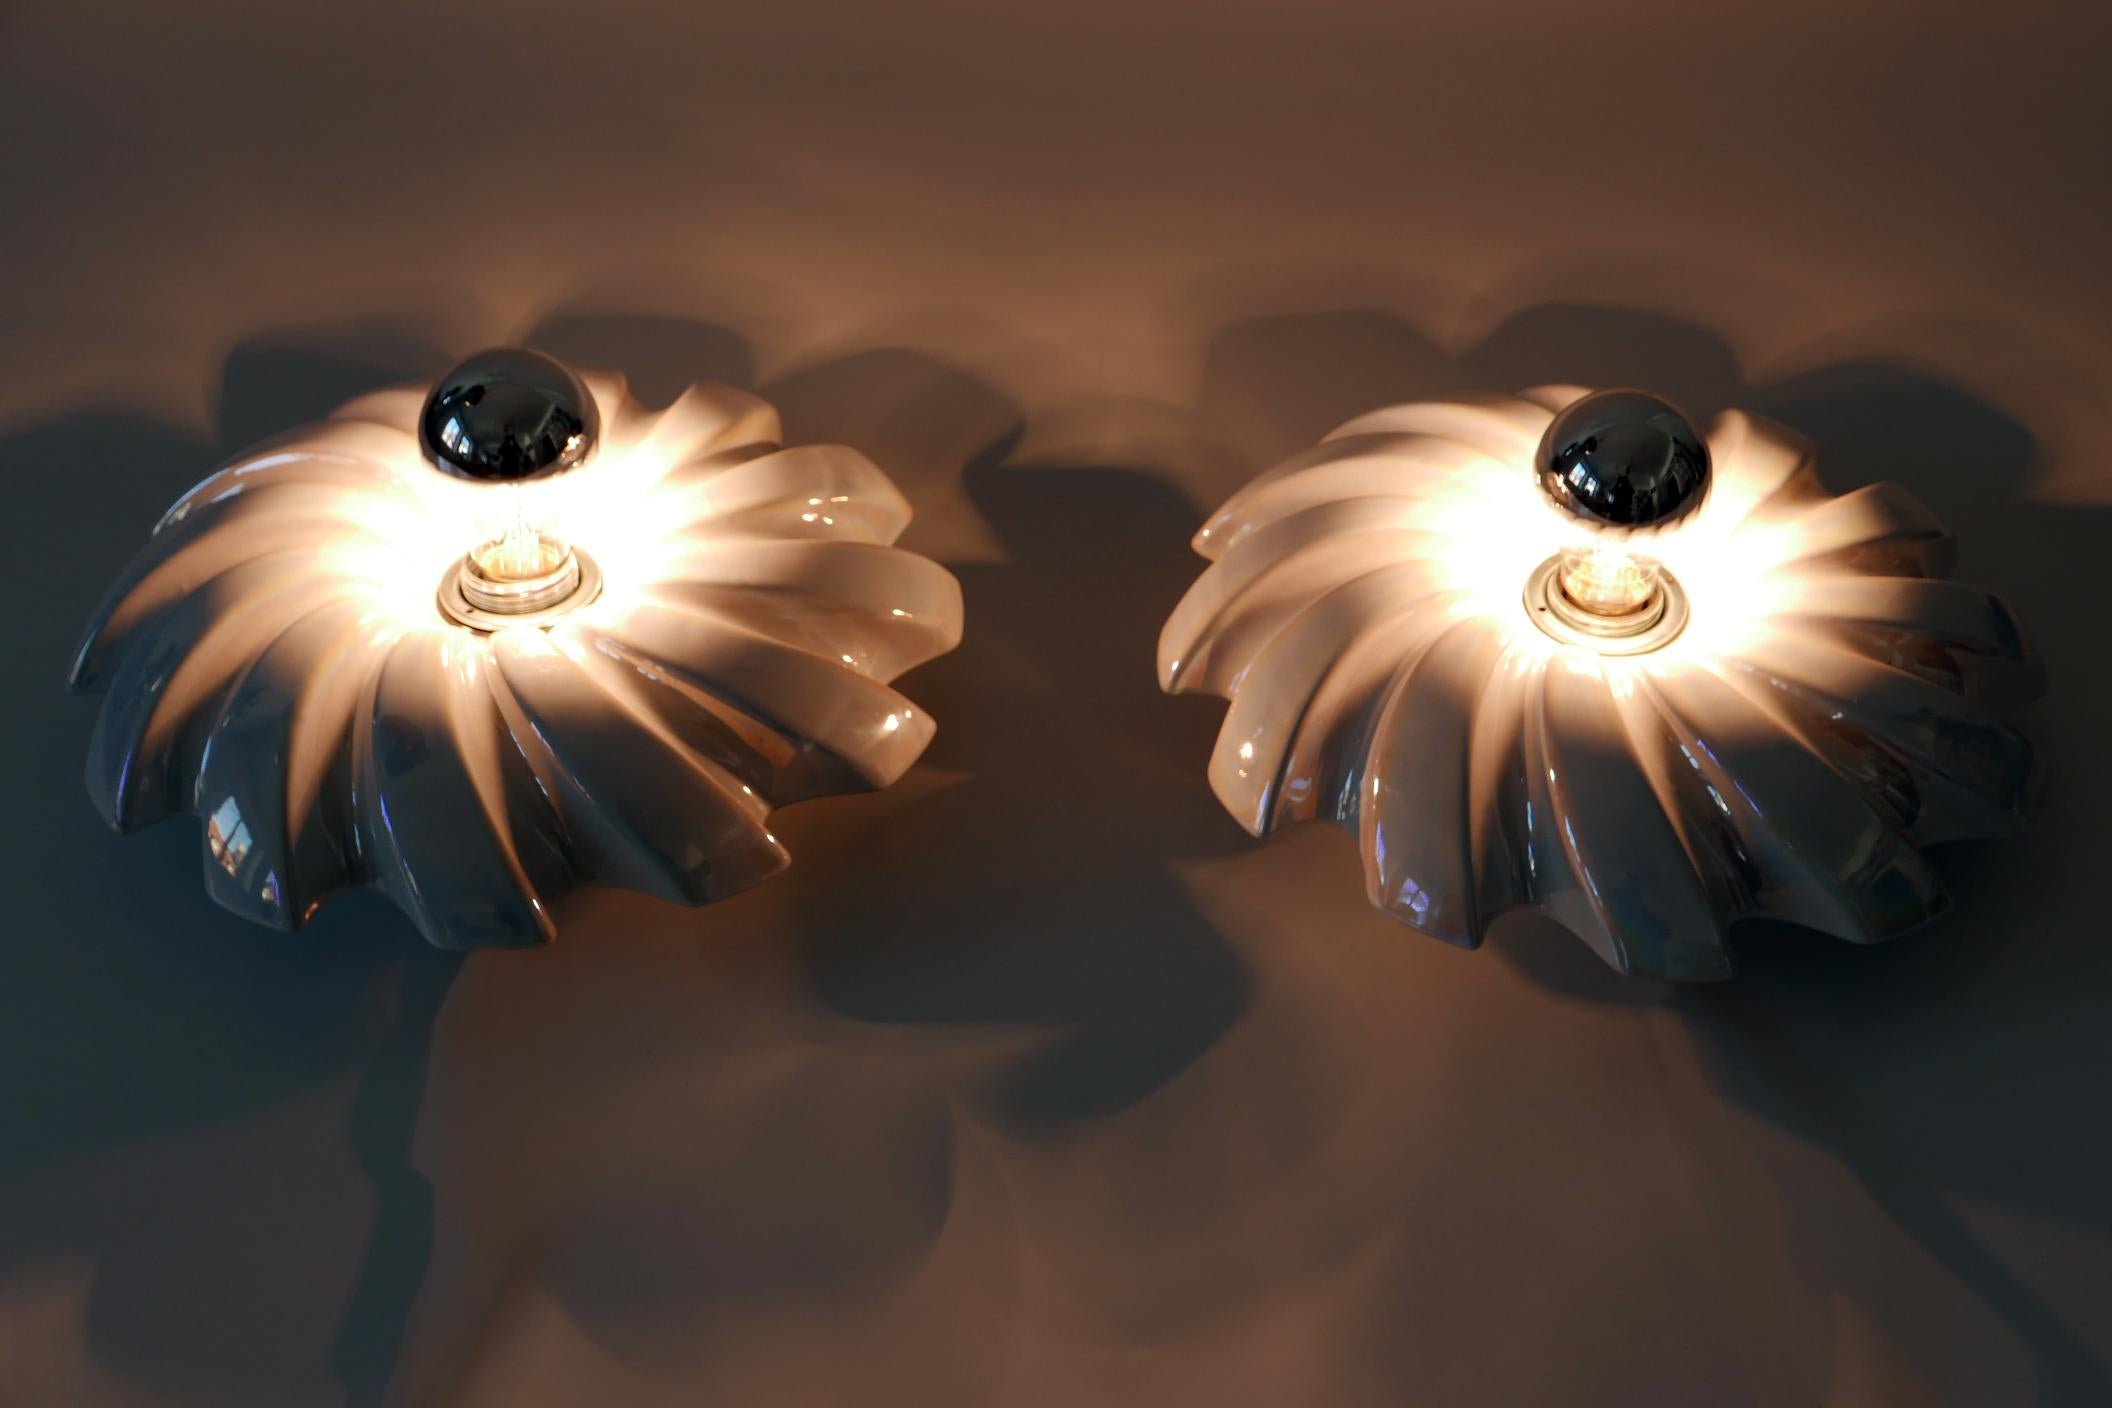 Set of Two Mid-Century Modern Iridescent Glazed PAN Wall Lamps by Goebel Germany For Sale 4